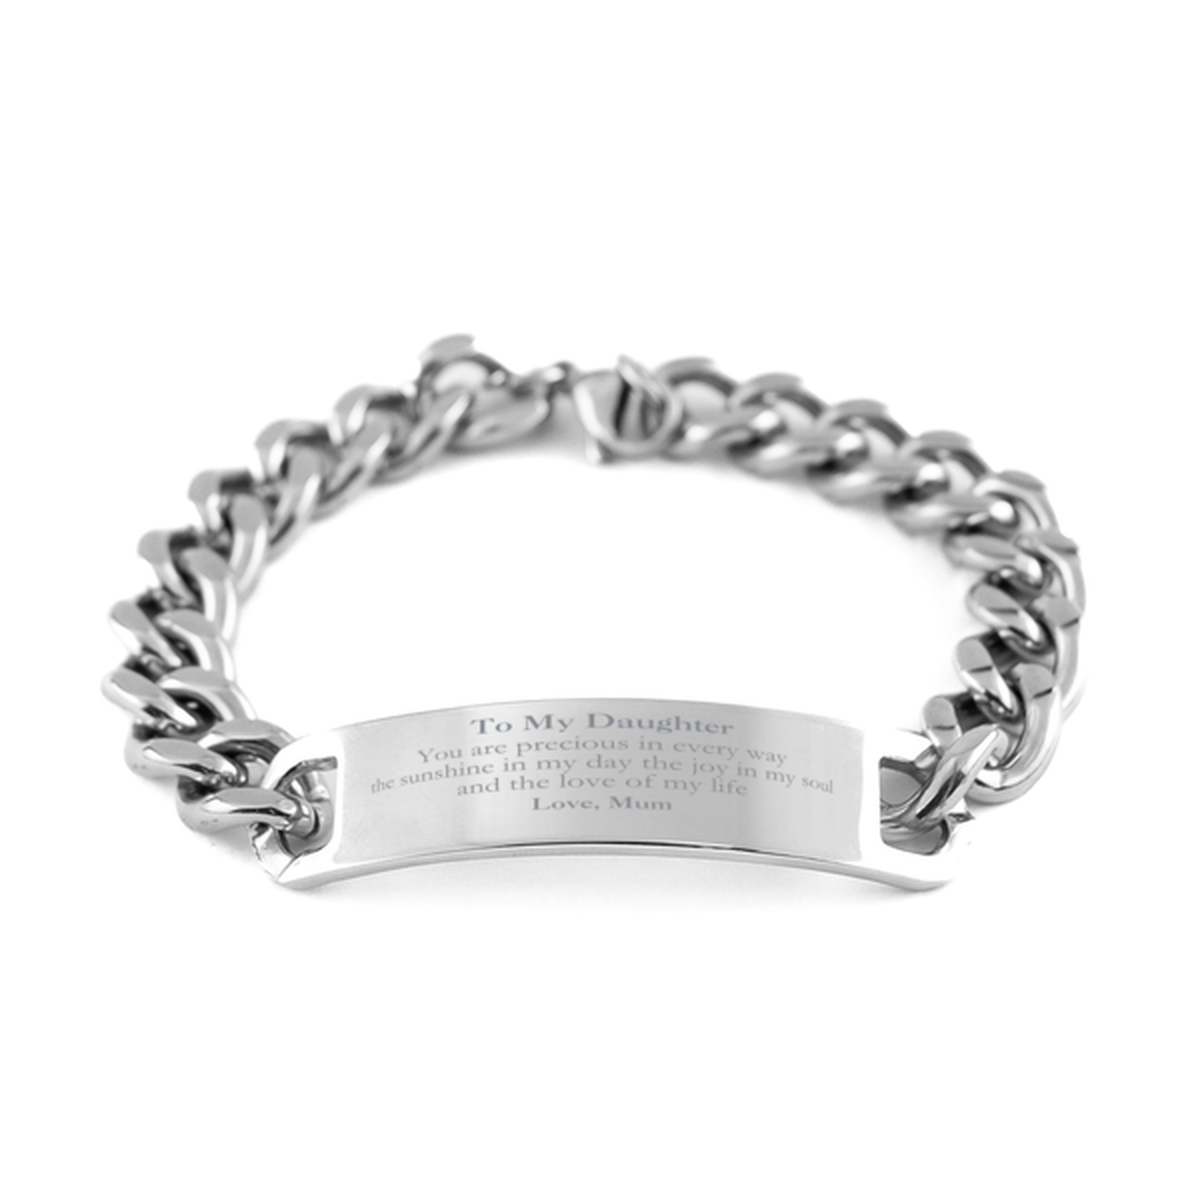 Graduation Gifts for Daughter Cuban Chain Stainless Steel Bracelet Present from Mum, Christmas Daughter Birthday Gifts Daughter You are precious in every way the sunshine in my day. Love, Mum